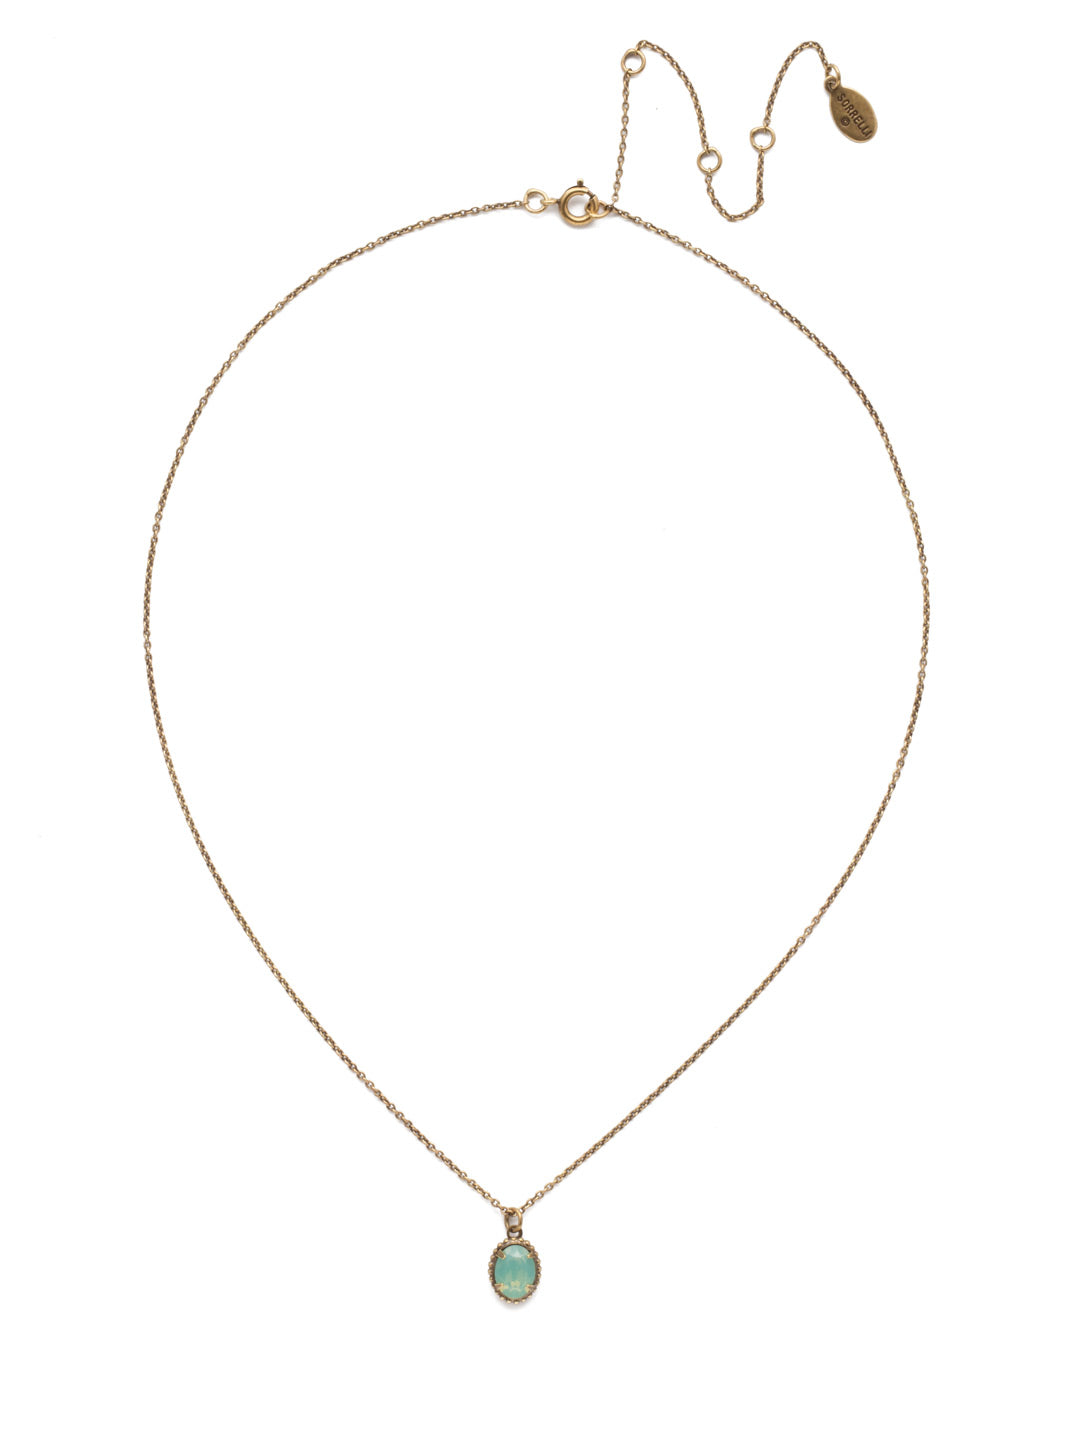 Maisie Pendant Necklace - NEF49AGPAC - This is the perfect day-to-night sparkling tiny pendant necklace that has an adjustable chain to fit your neckline. From Sorrelli's Pacific Opal collection in our Antique Gold-tone finish.